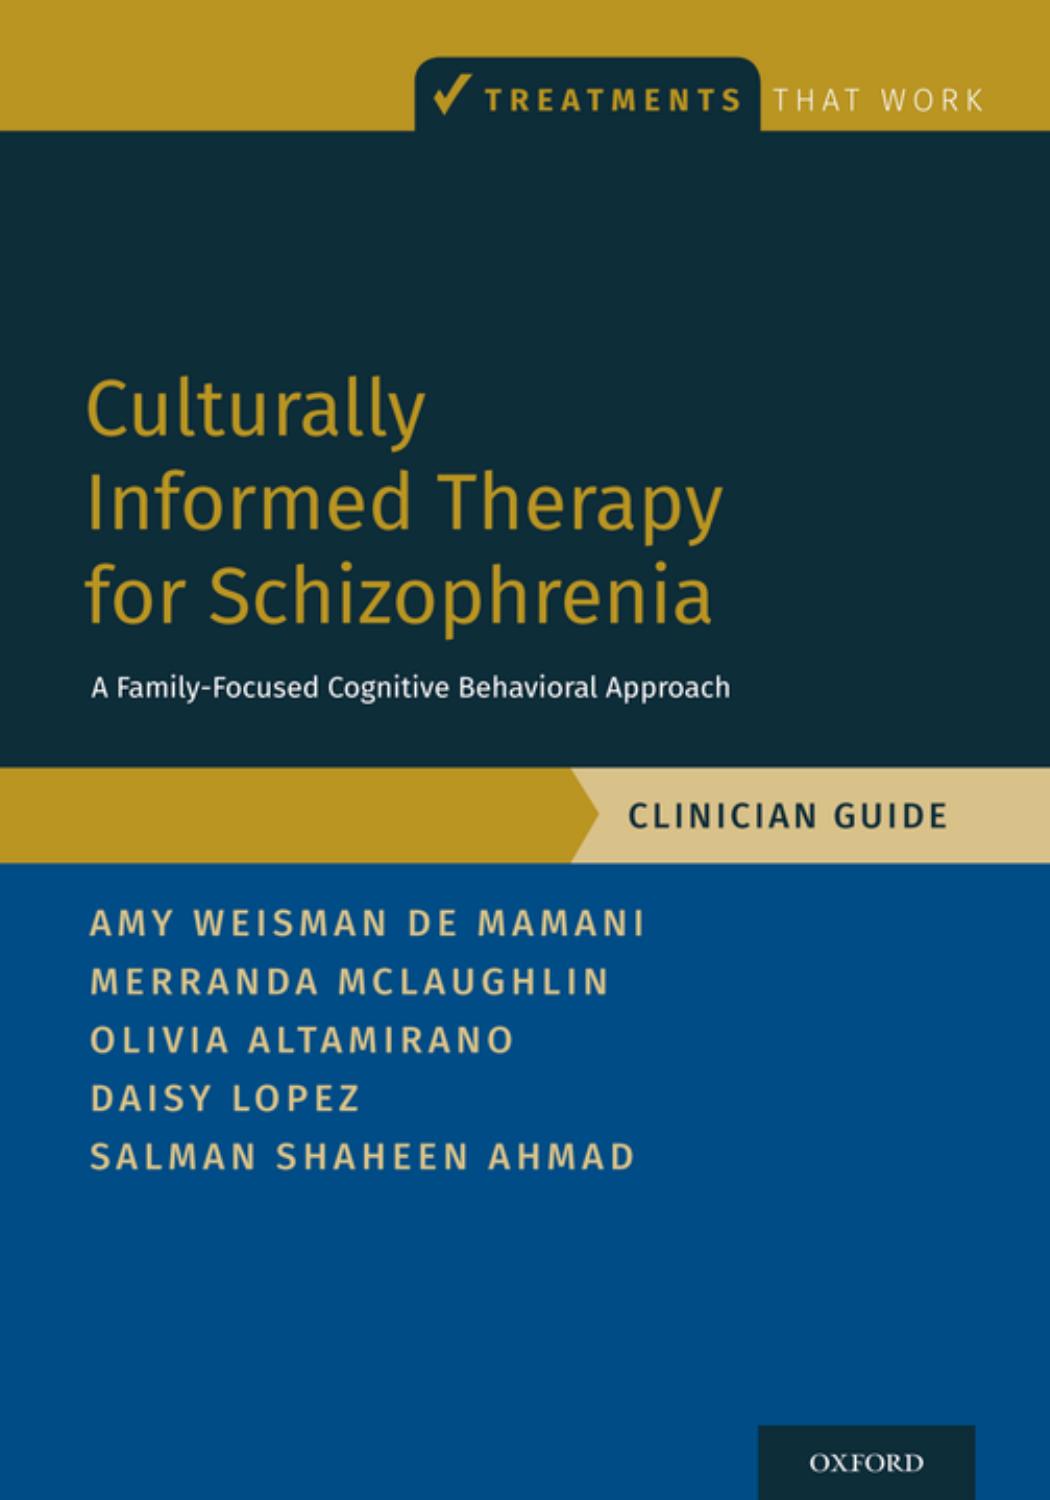 Culturally Informed Therapy for Schizophrenia: A Family-Focused Cognitive Behavioral Approach, Clinician Guide (Treatments That Work) by Amy Weisman de Mamani Merranda McLaughlin Olivia Altamirano Daisy Lopez Salman Shaheen Ahmad